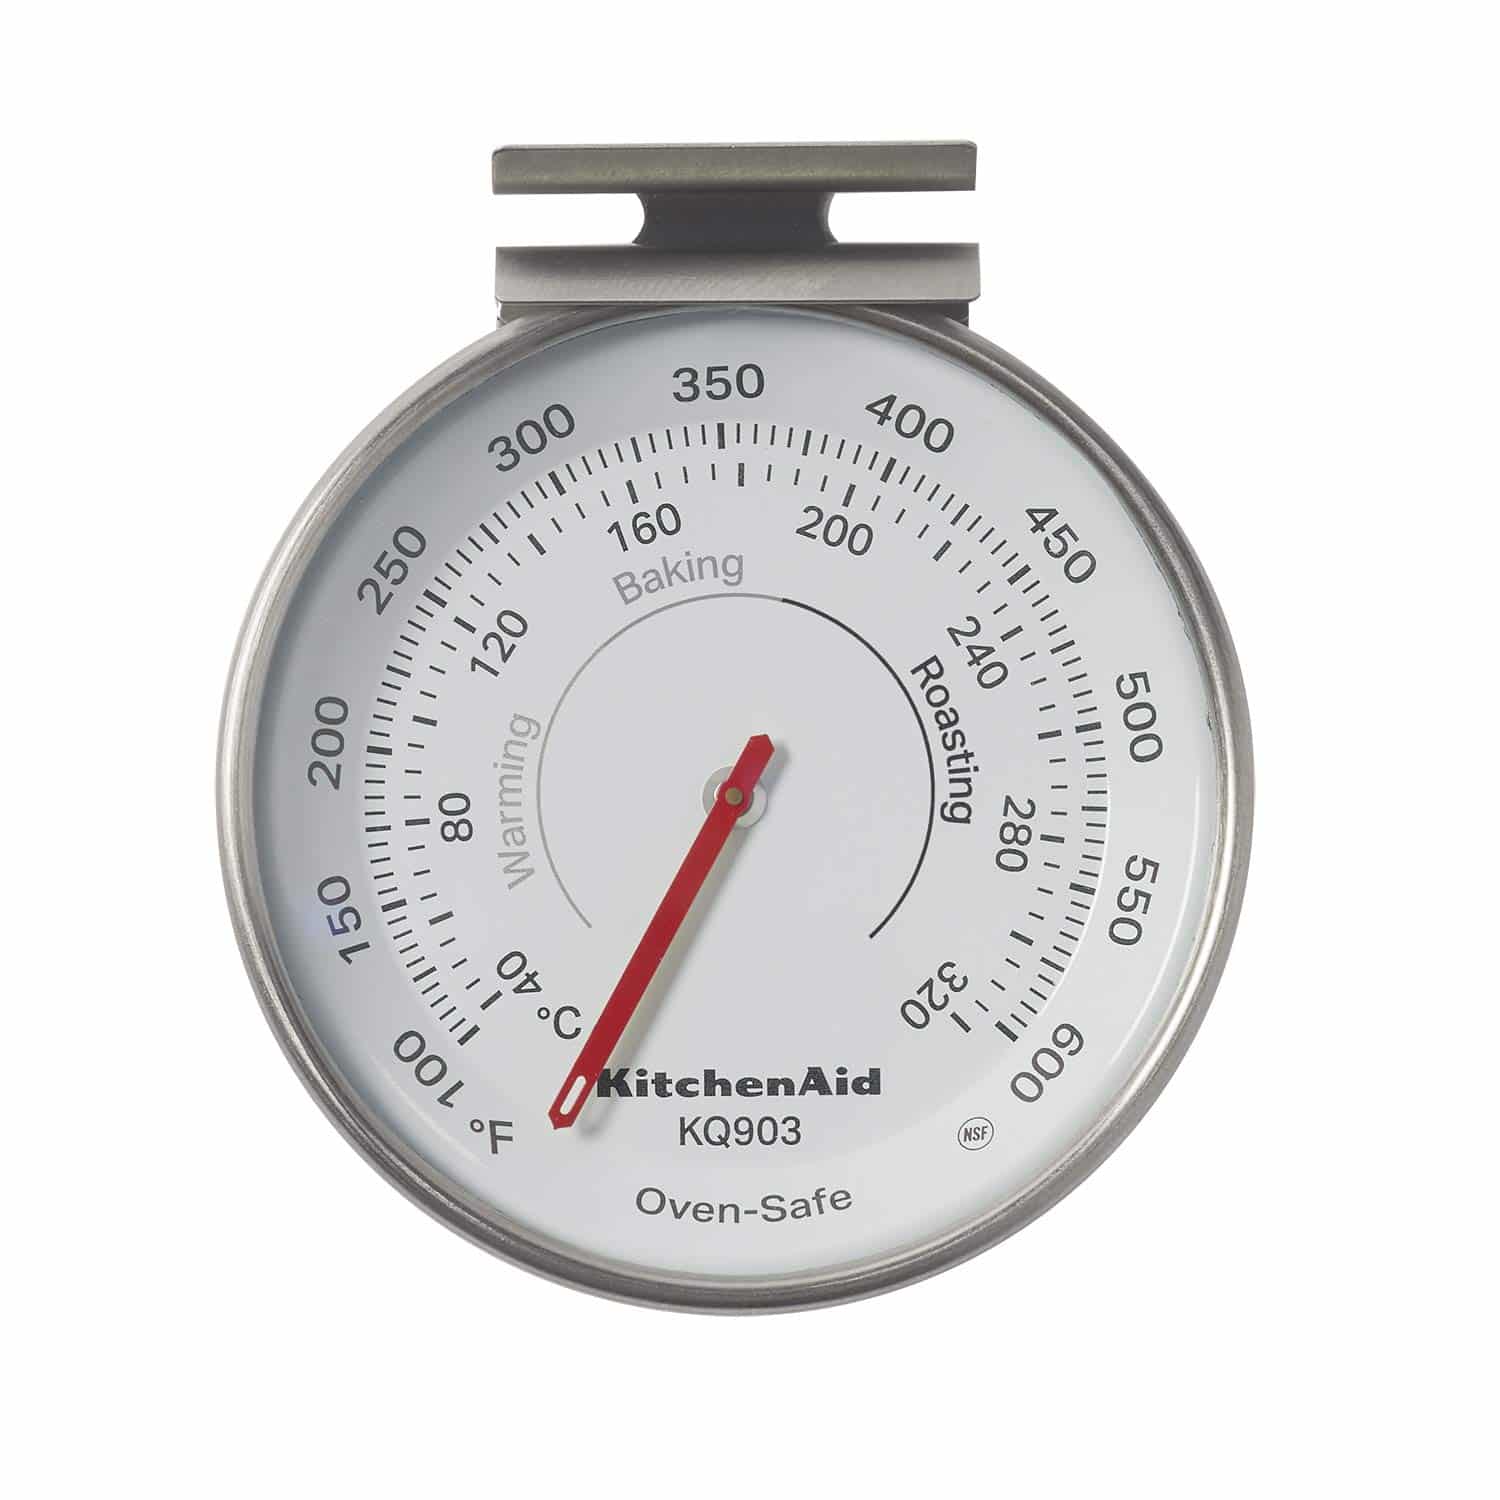 Top 10 Best Oven Thermometers in 2021 Reviews